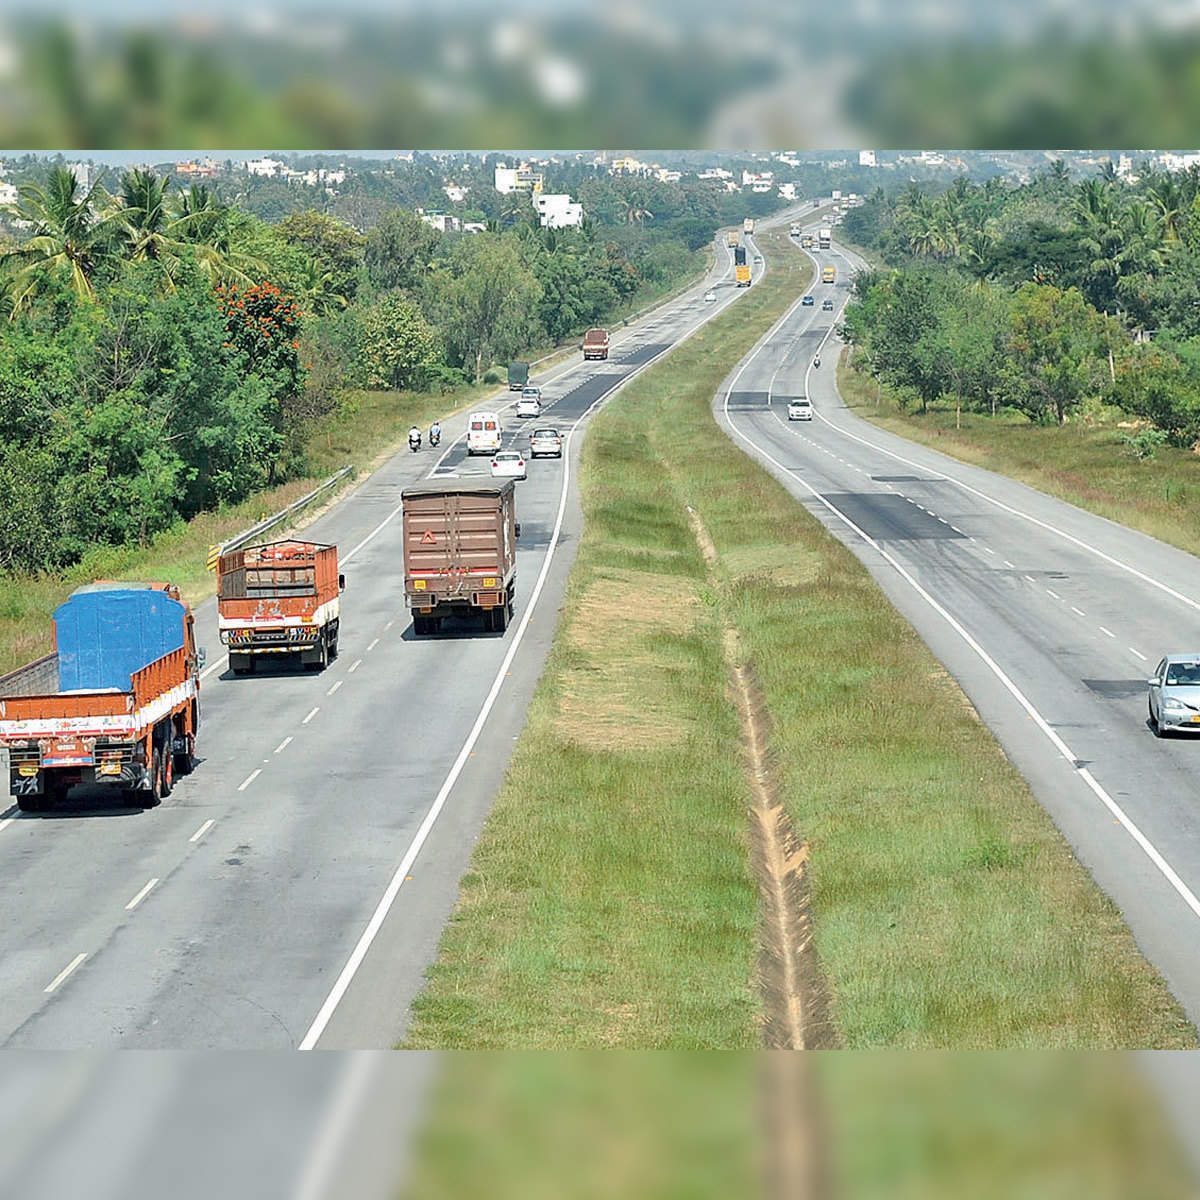 NEW RING ROAD IN THE OFFING: DARE WE HOPE?